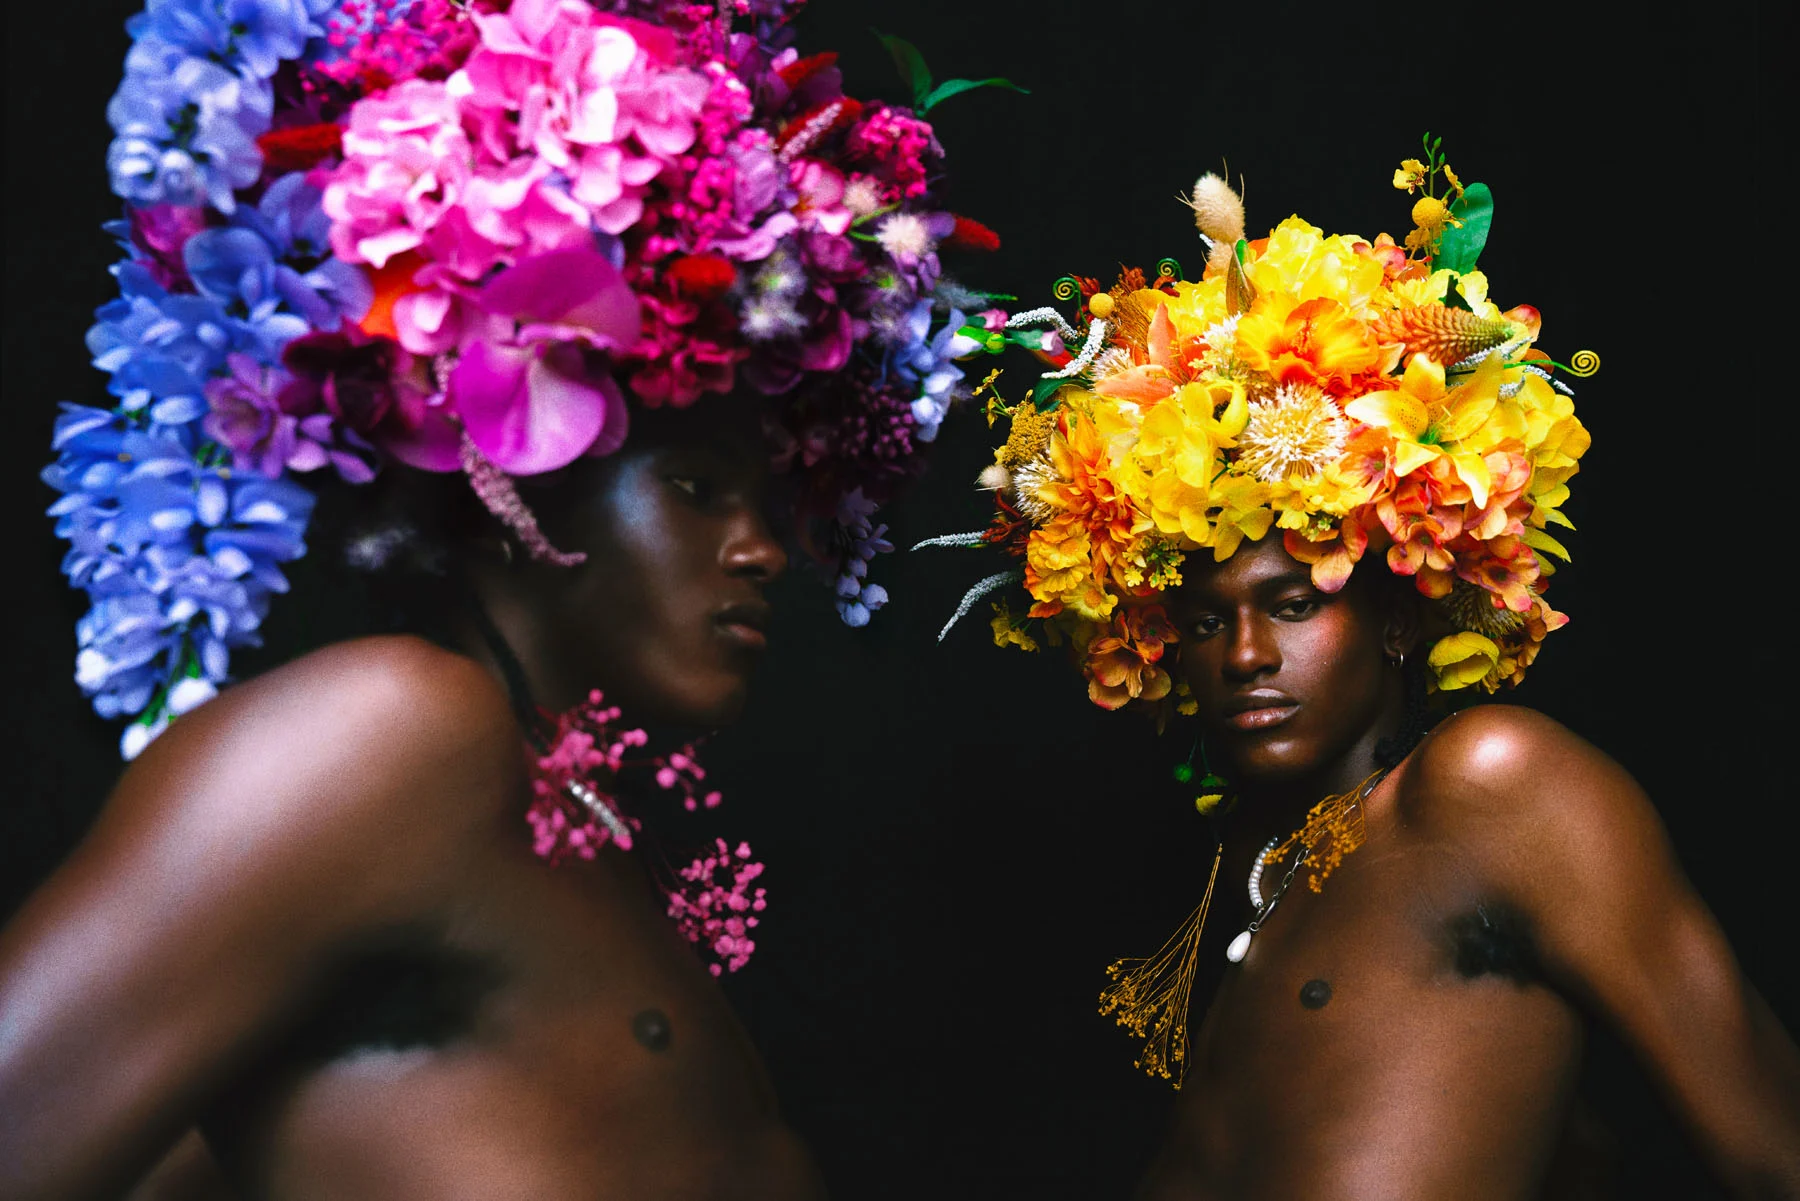 A photograph of male twins wearing flower headpieces shaped like afros, sitting across from each other. The twin with a purple headpiece looks to the right while the twin with the yellow headpiece looks at the camera.